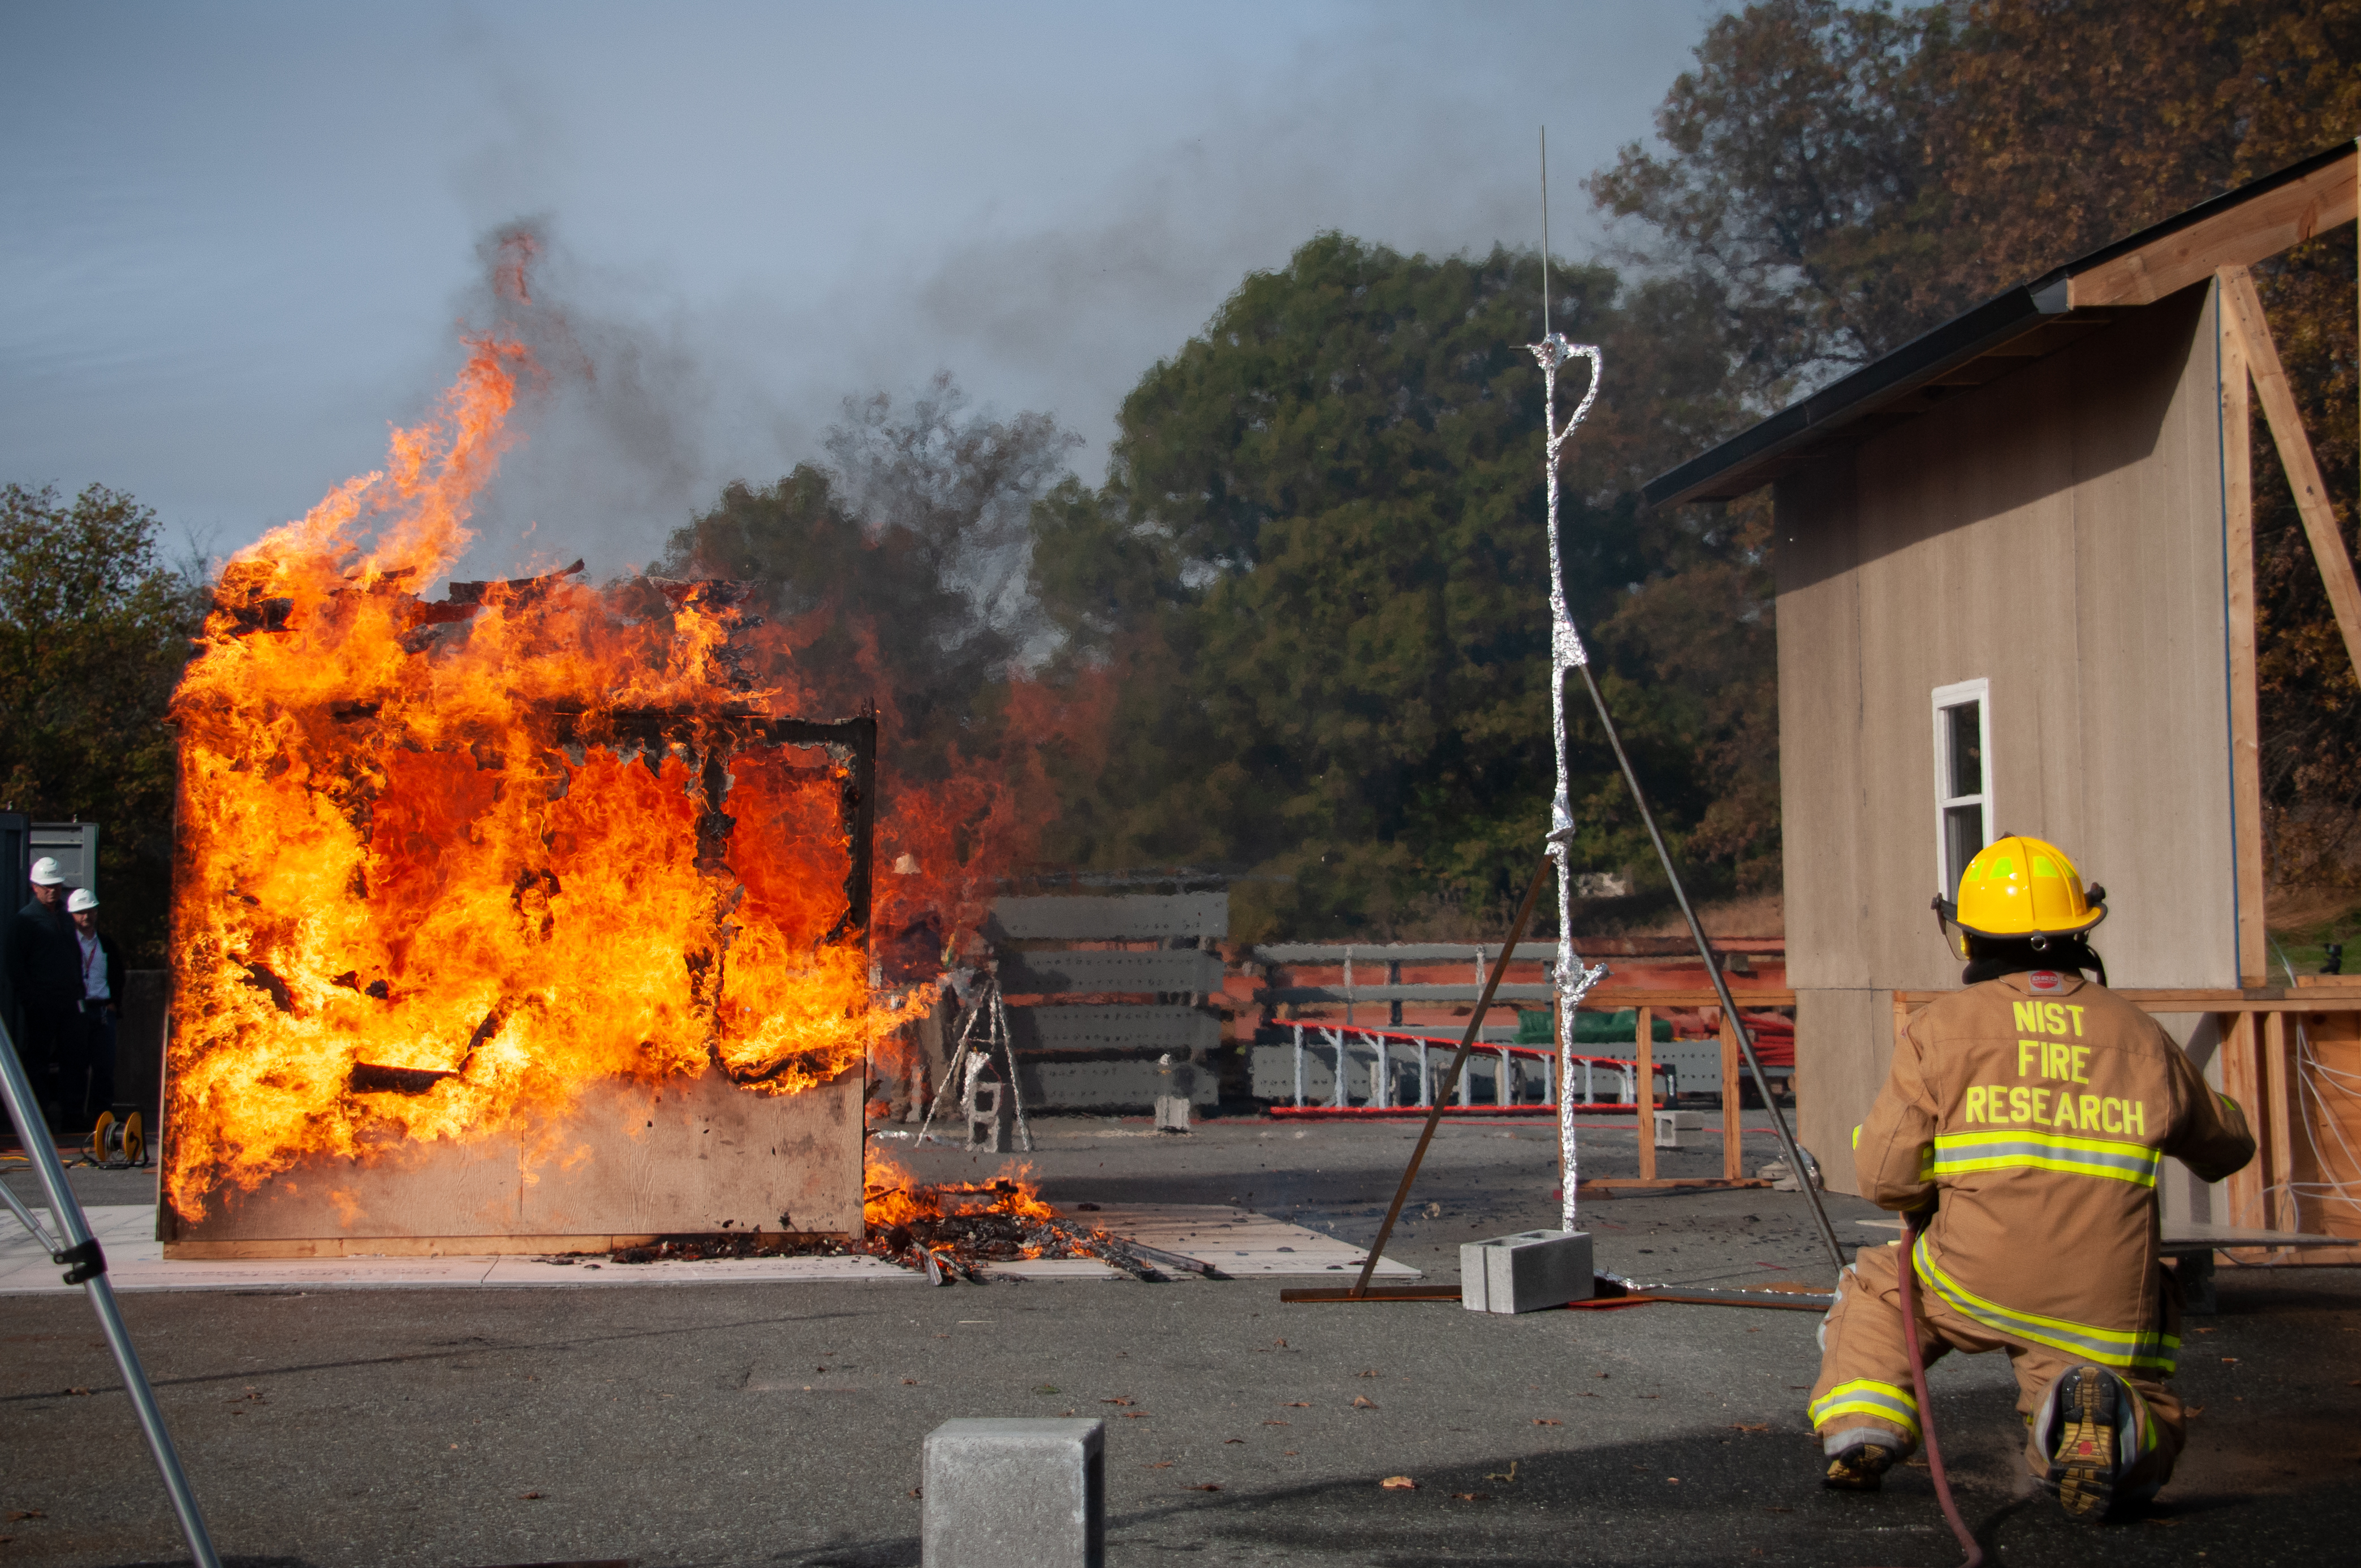 Left: burning wooden shed engulfed in flames. Middle: Tall metal pole. Far right: Person crouched on ground in fire gear